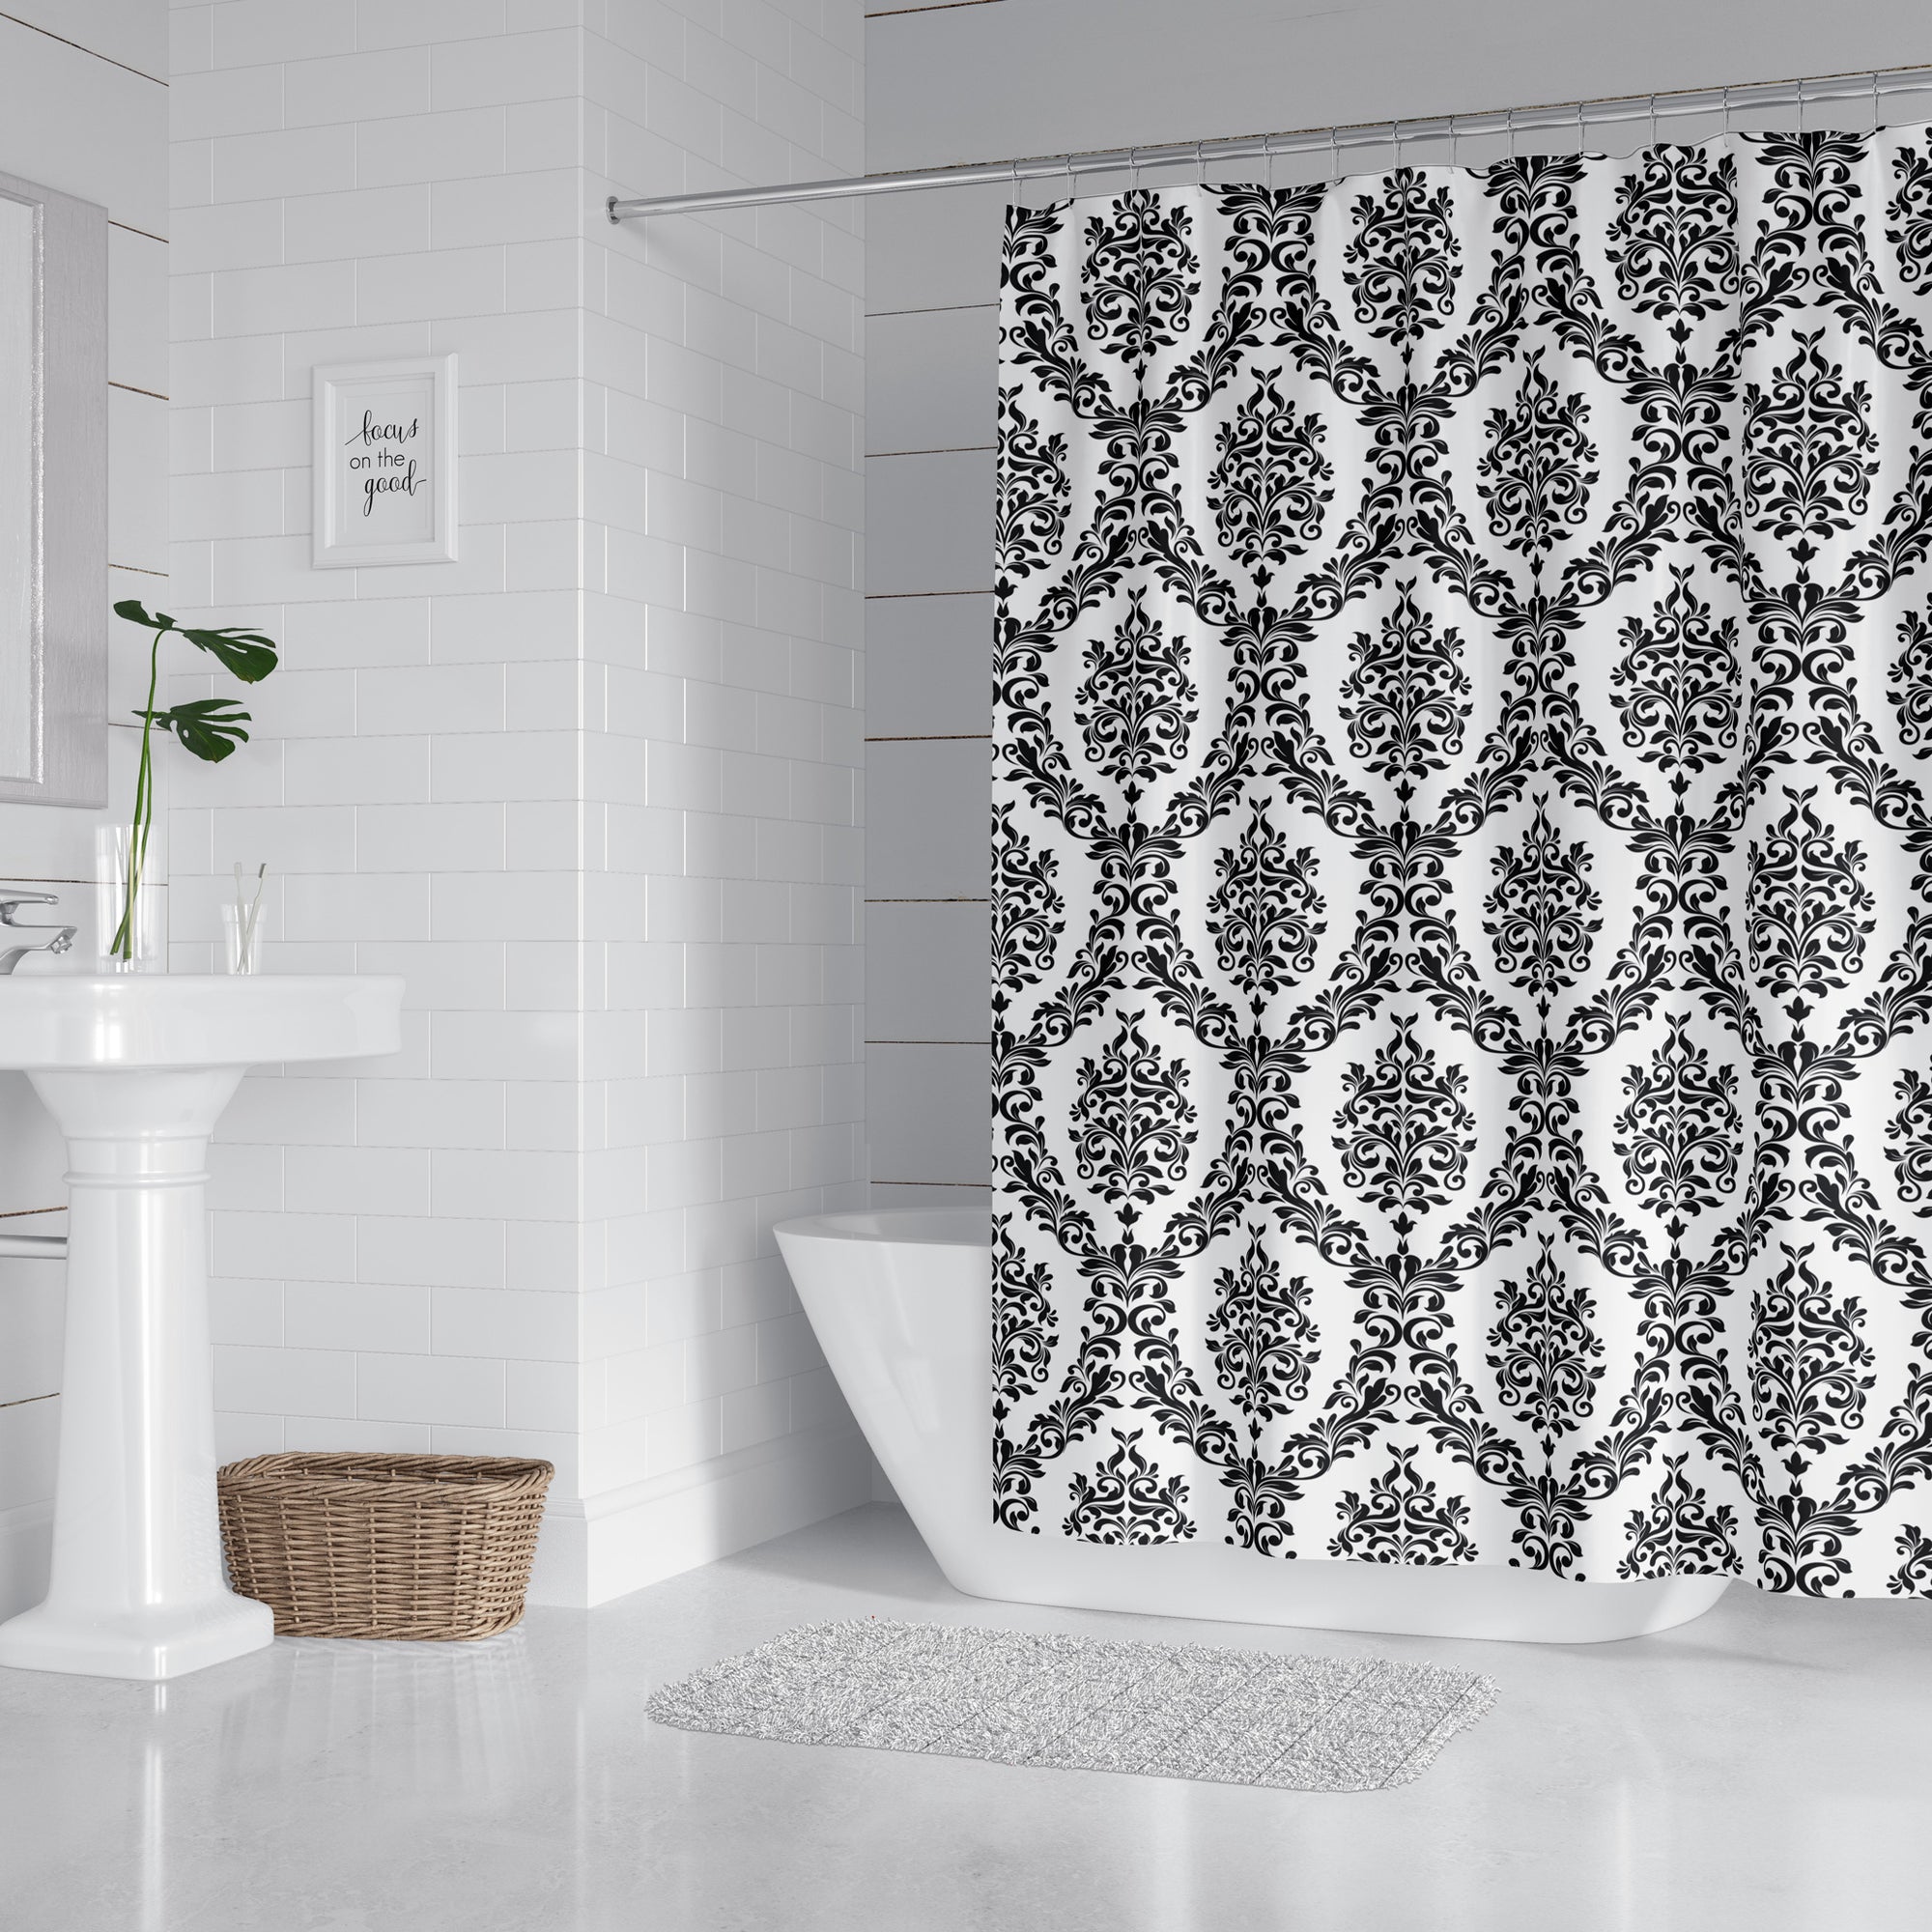 Shower curtain in black and white damask